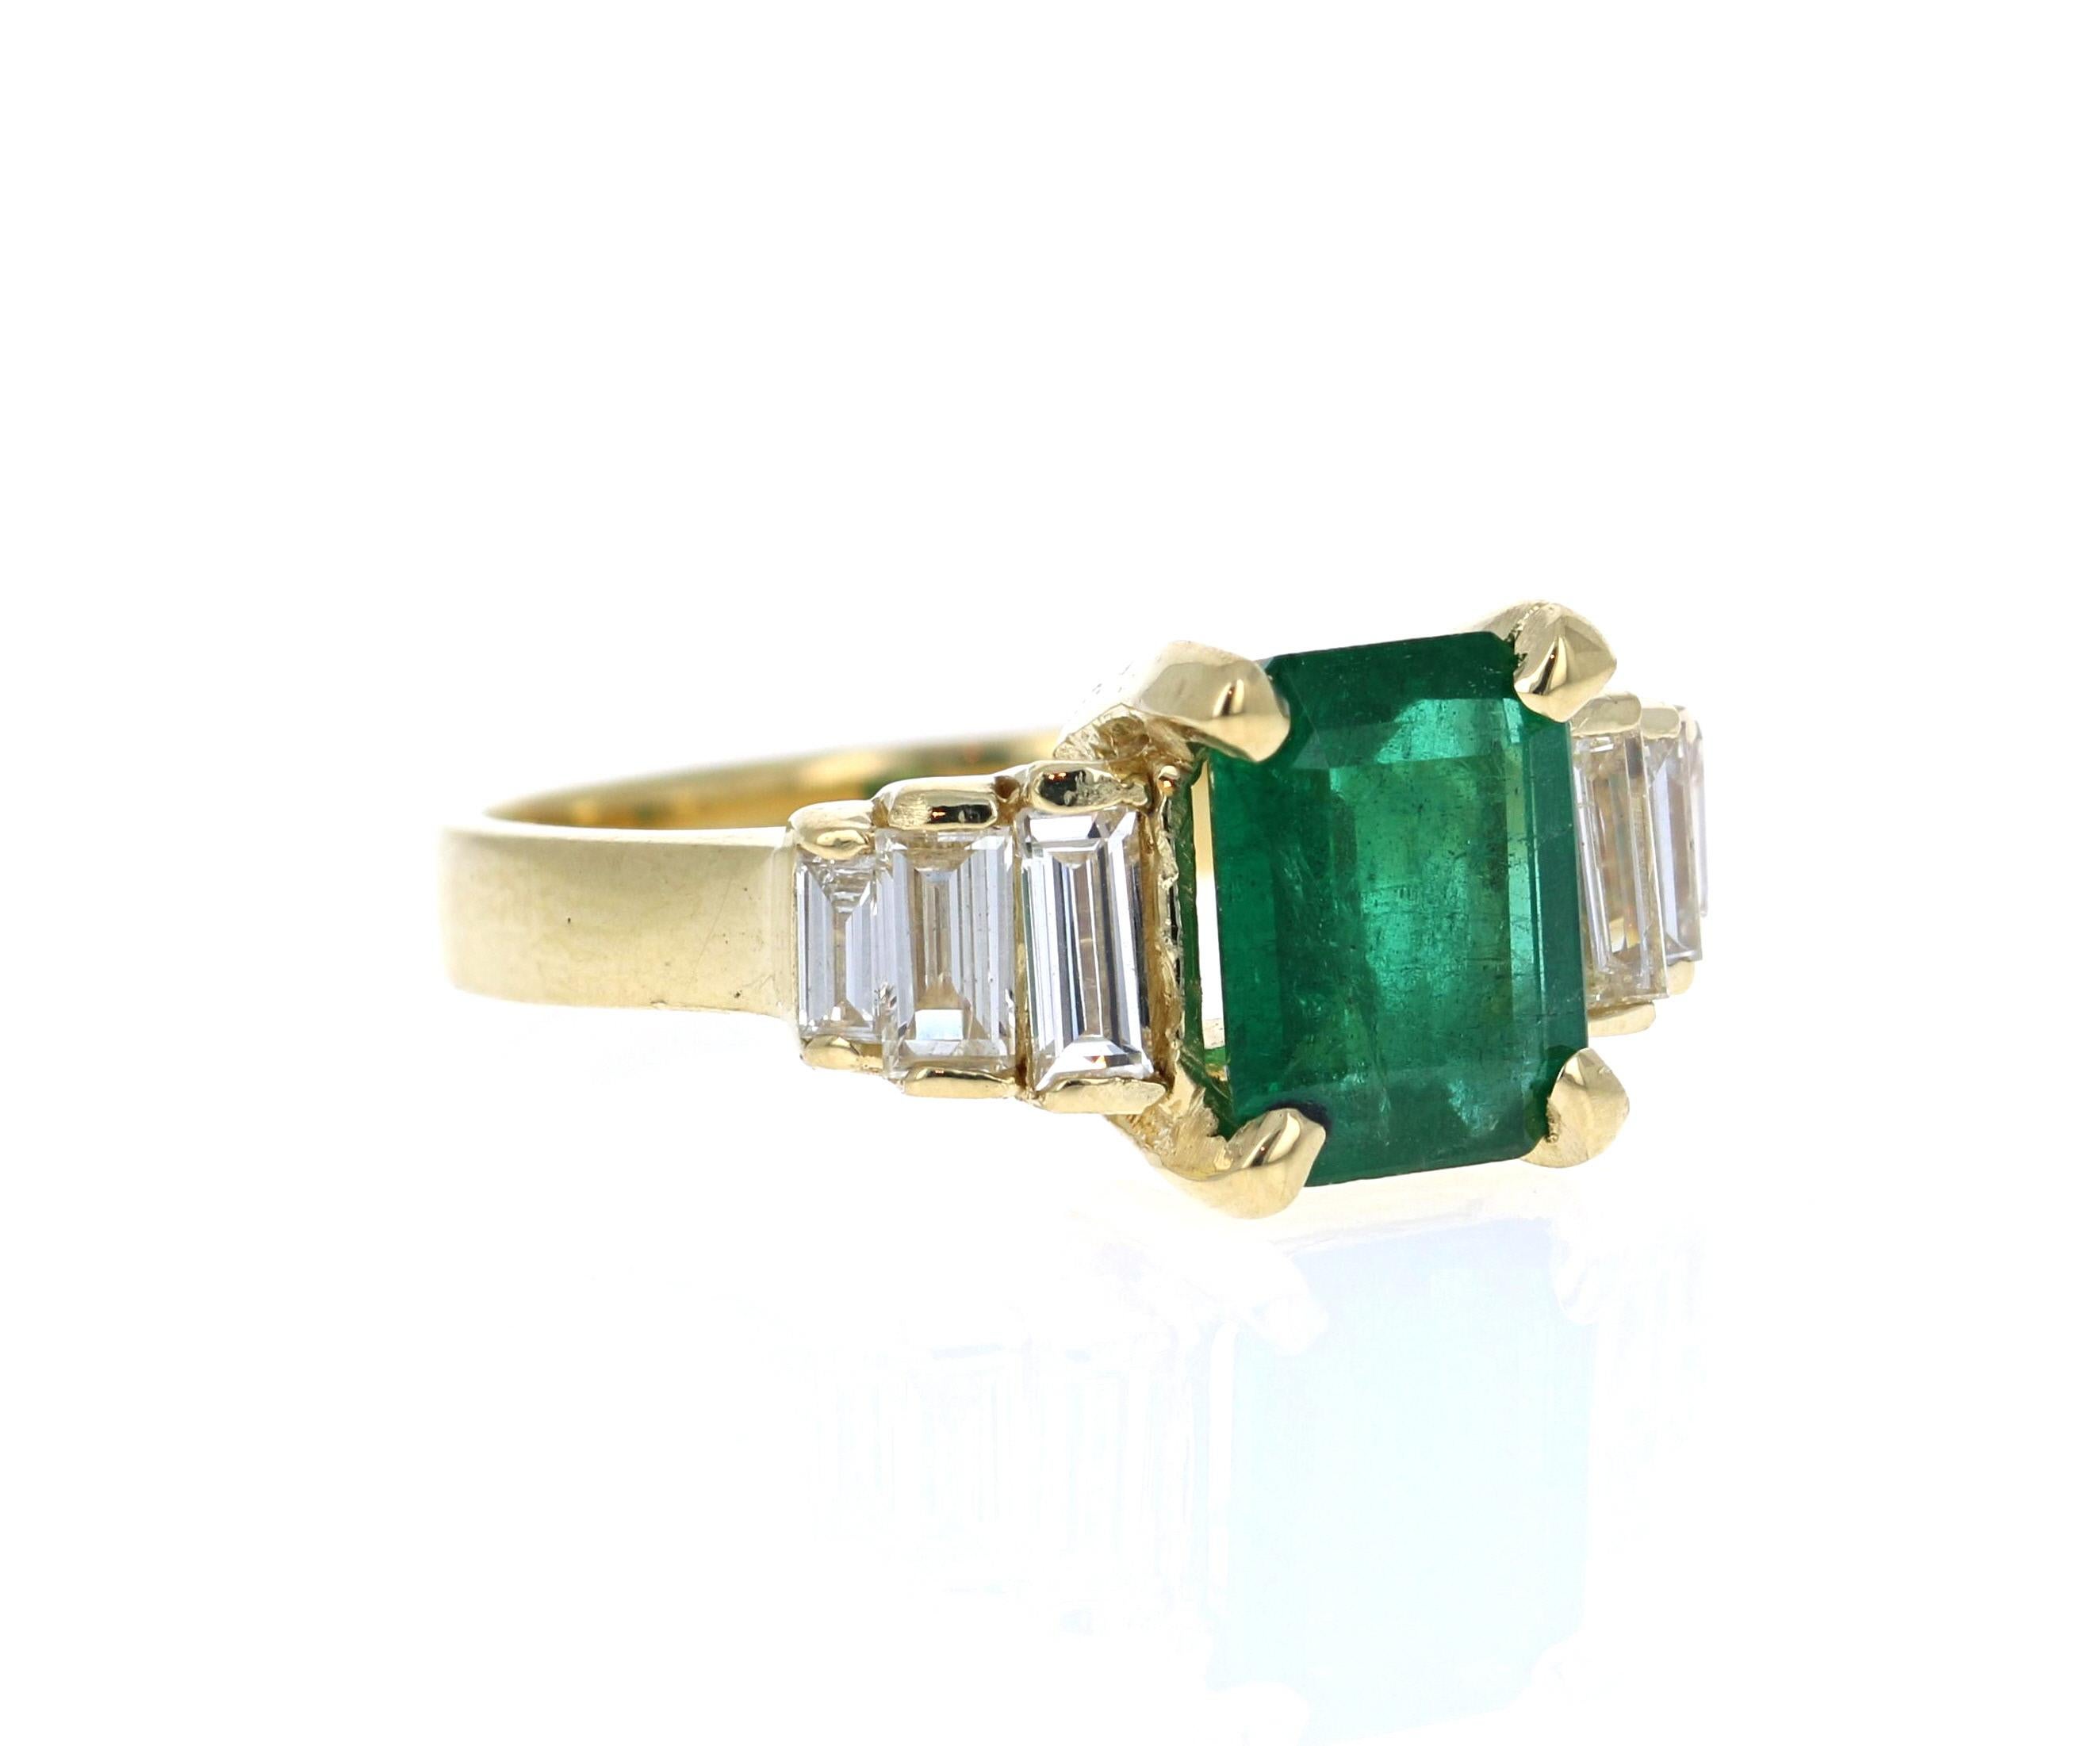 This gorgeous ring has a large and deep green Emerald Cut Emerald that is set in the center of the ring that weighs 1.95 Carats.  The Emerald is surrounded by 6 Baguette Cut Diamonds that weigh 0.68 Carats. (Clarity: VS, Color: H). The total carat